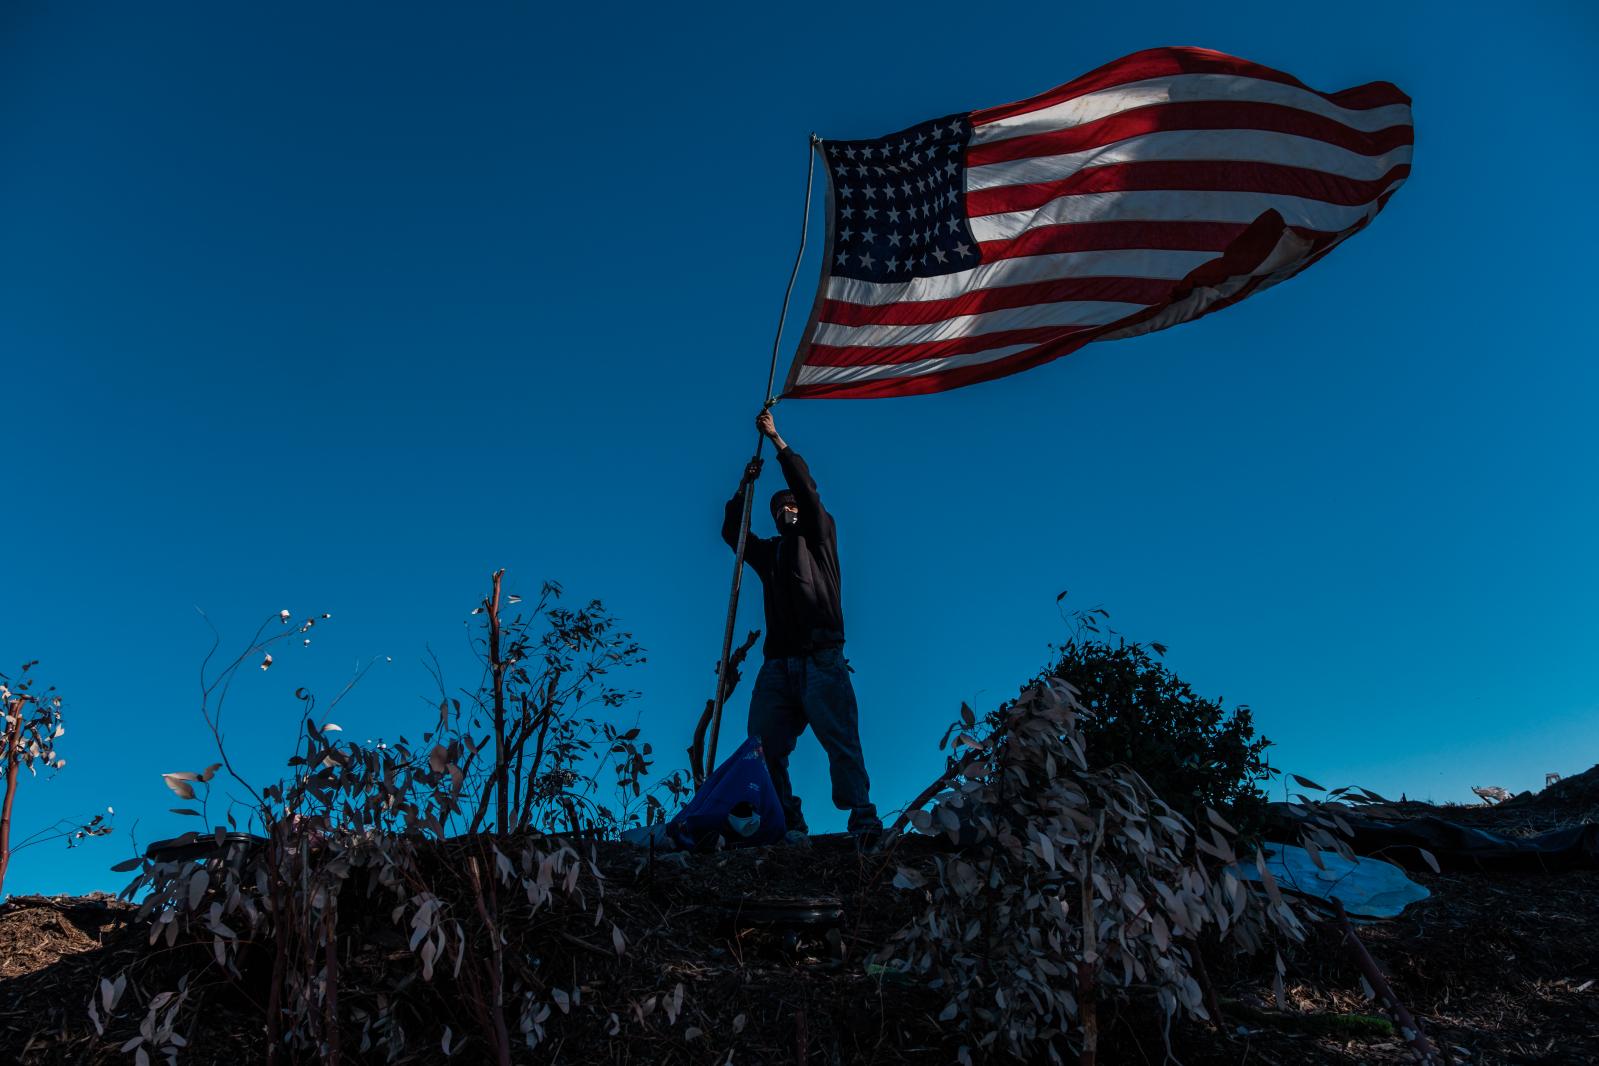 Image from NEWS FEATURES - A man identified as Junior adjusts his American flag at...